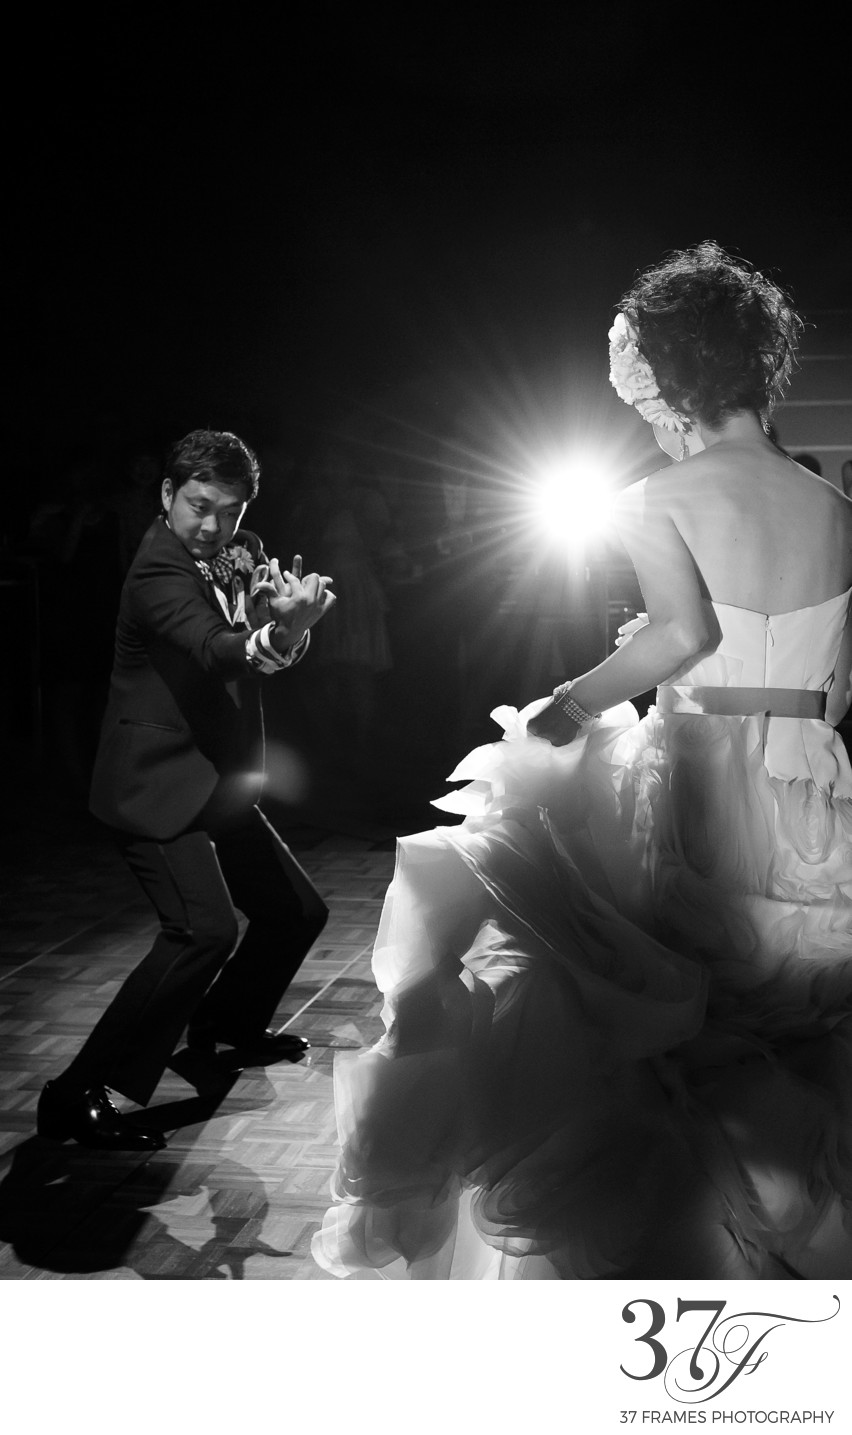 The Best New First Dance Wedding Songs